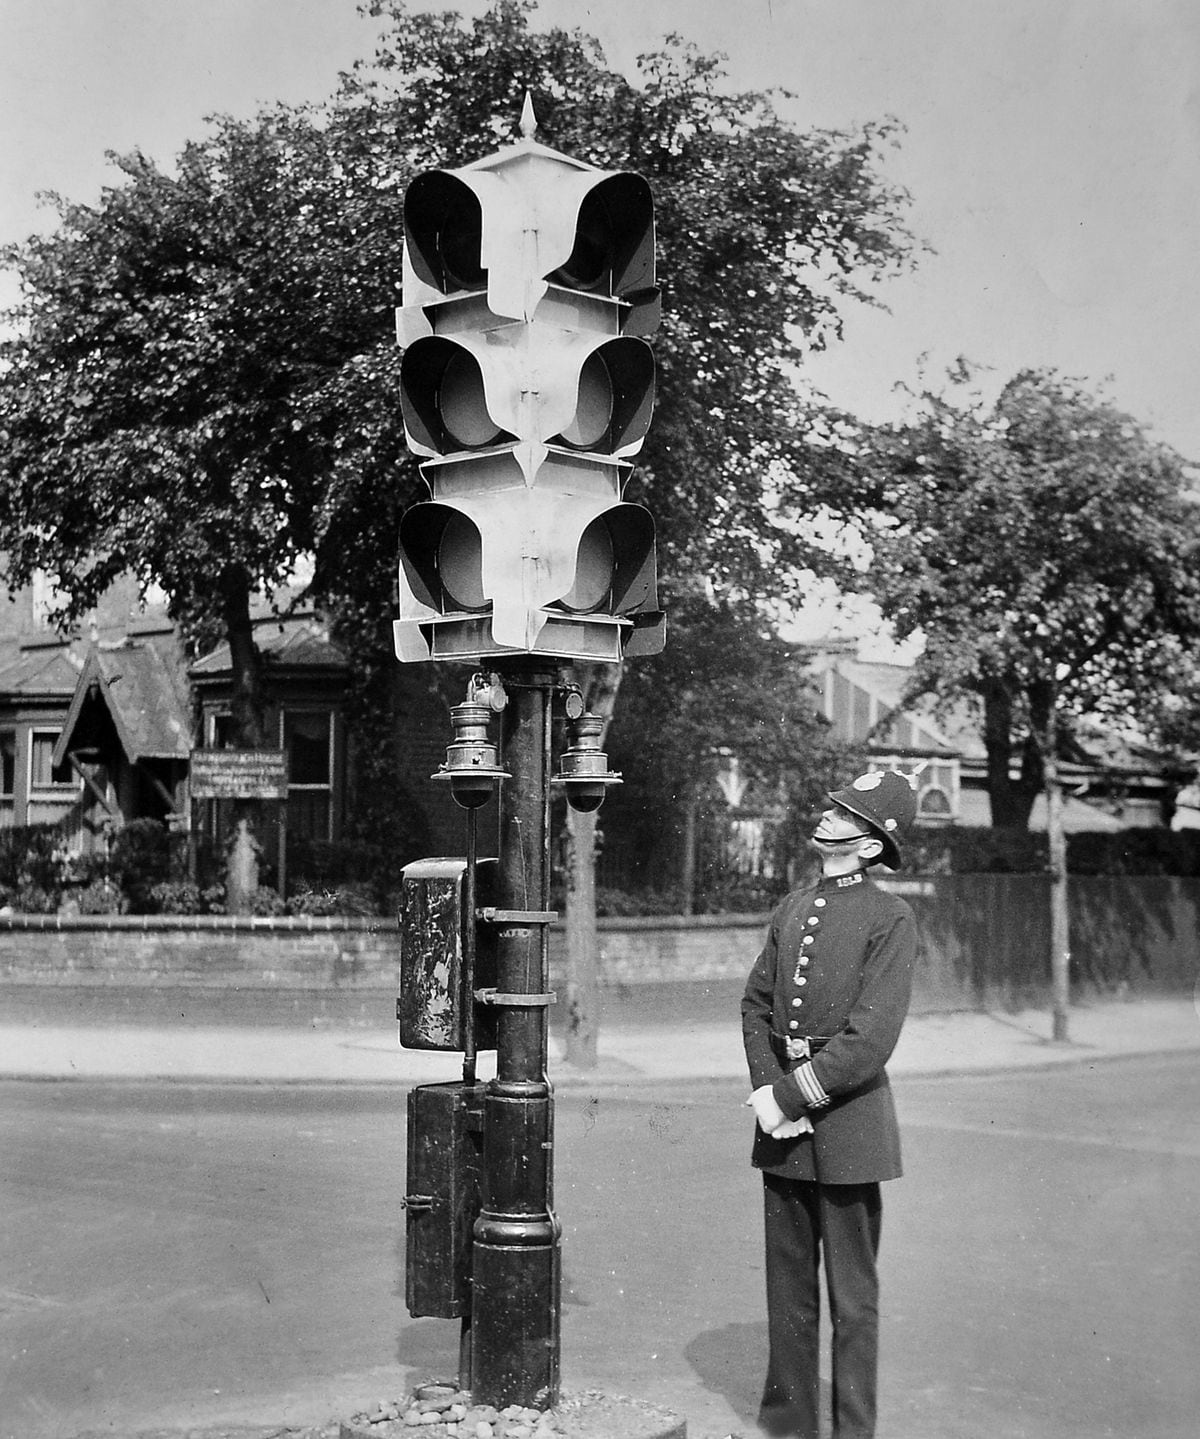 A police officer admires Birmingham's first "robot traffic policeman"